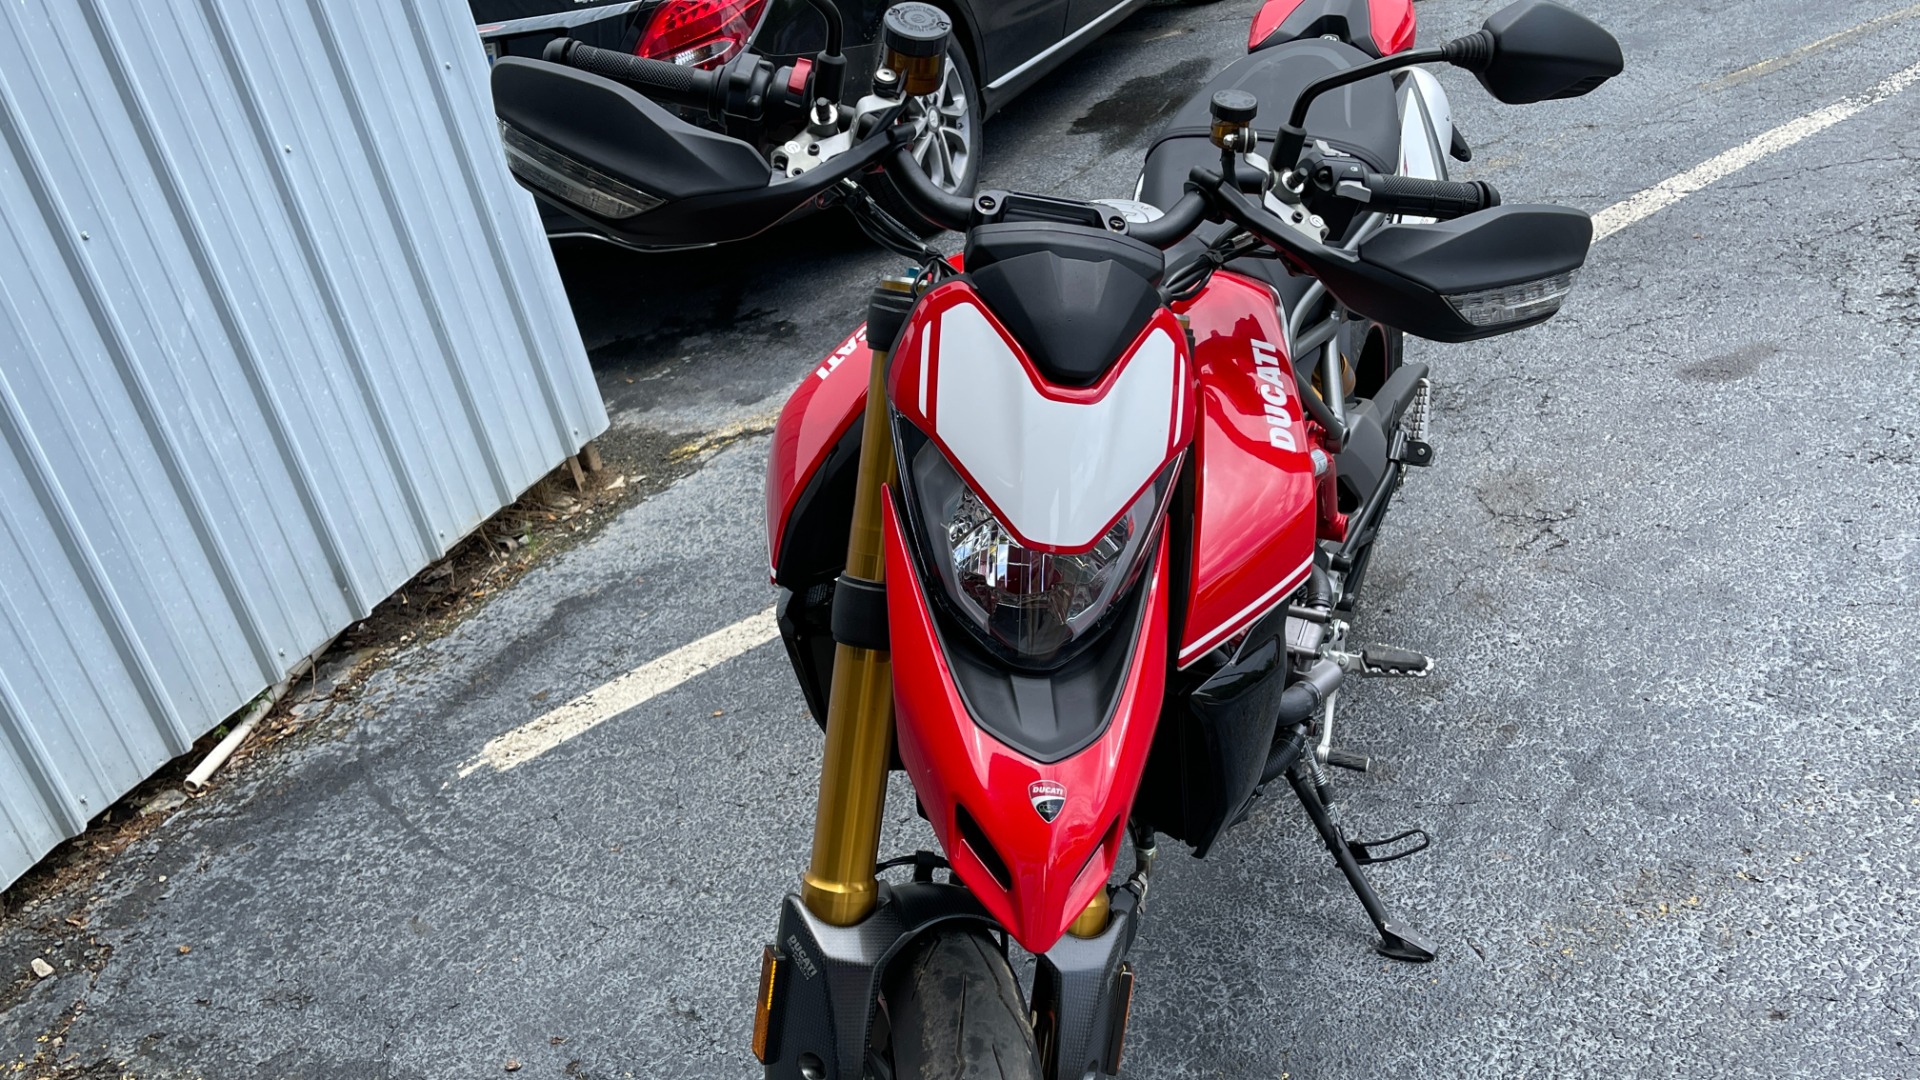 Used 2020 Ducati HYPERMOTARD 950 SP MOTORCYCLE / 114HP (85 kW) / LIKE NEW for sale $16,999 at Formula Imports in Charlotte NC 28227 4